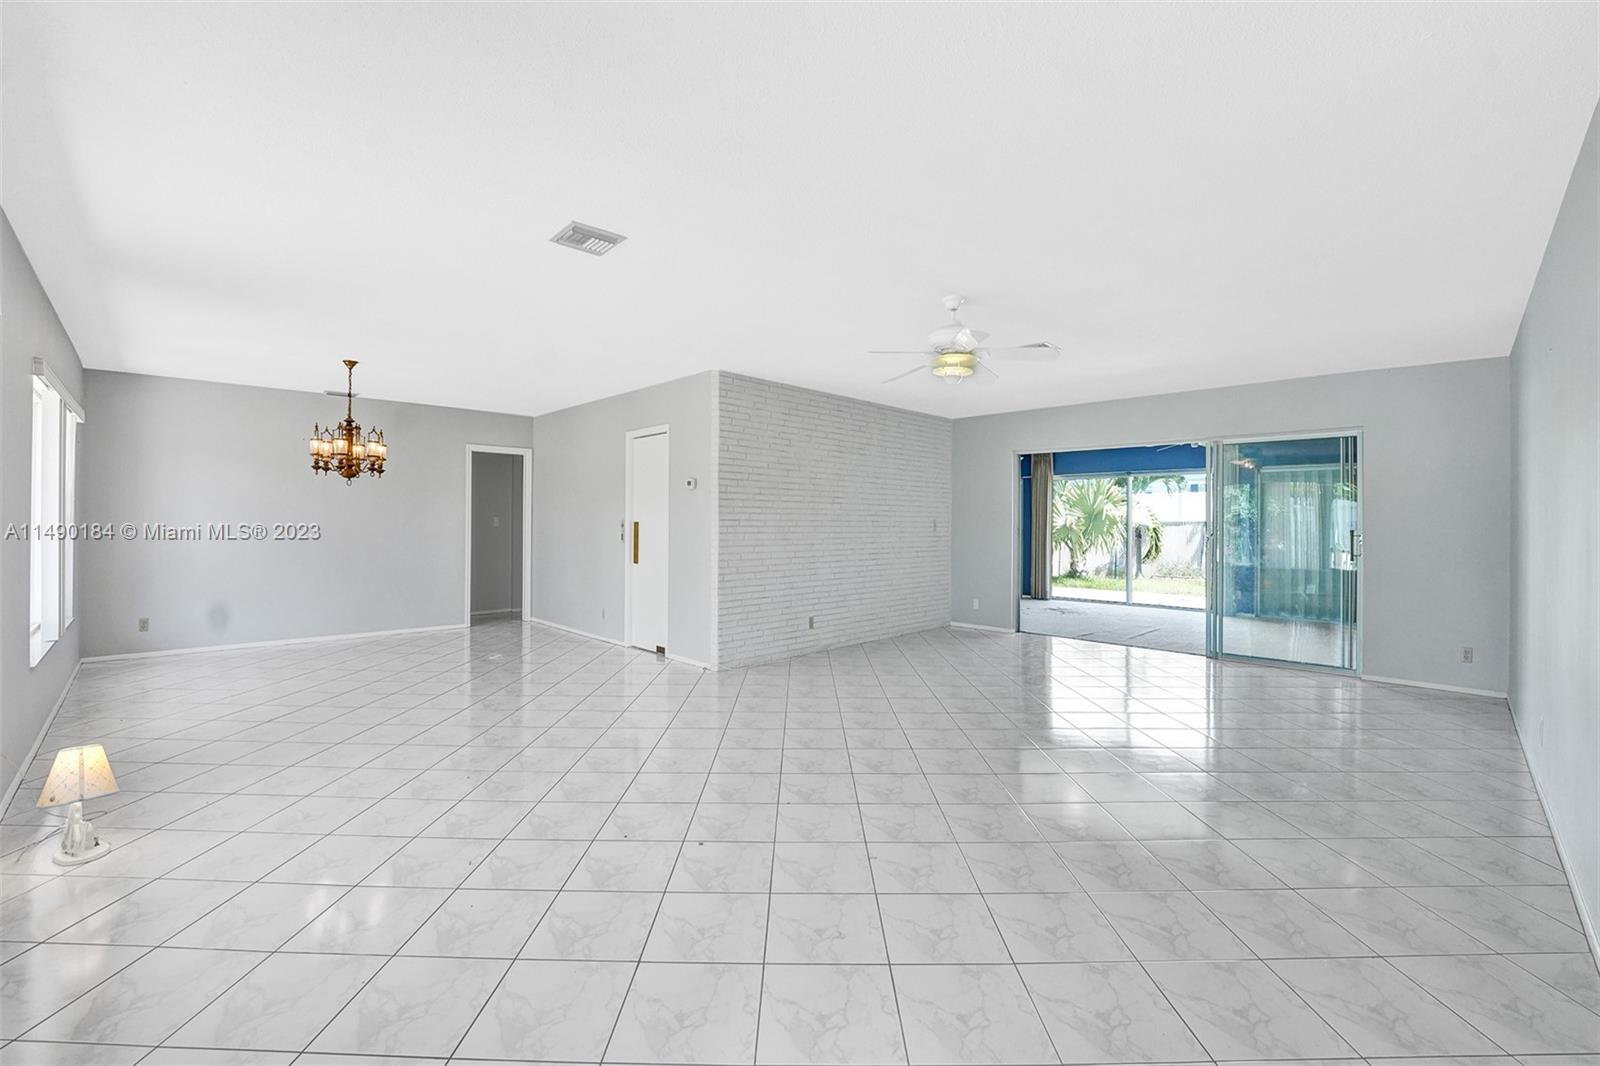 1237 Wiley St, Hollywood, Florida, 33019, United States, 5 Bedrooms Bedrooms, ,3 BathroomsBathrooms,Residential,For Sale,1237 Wiley St,1408066